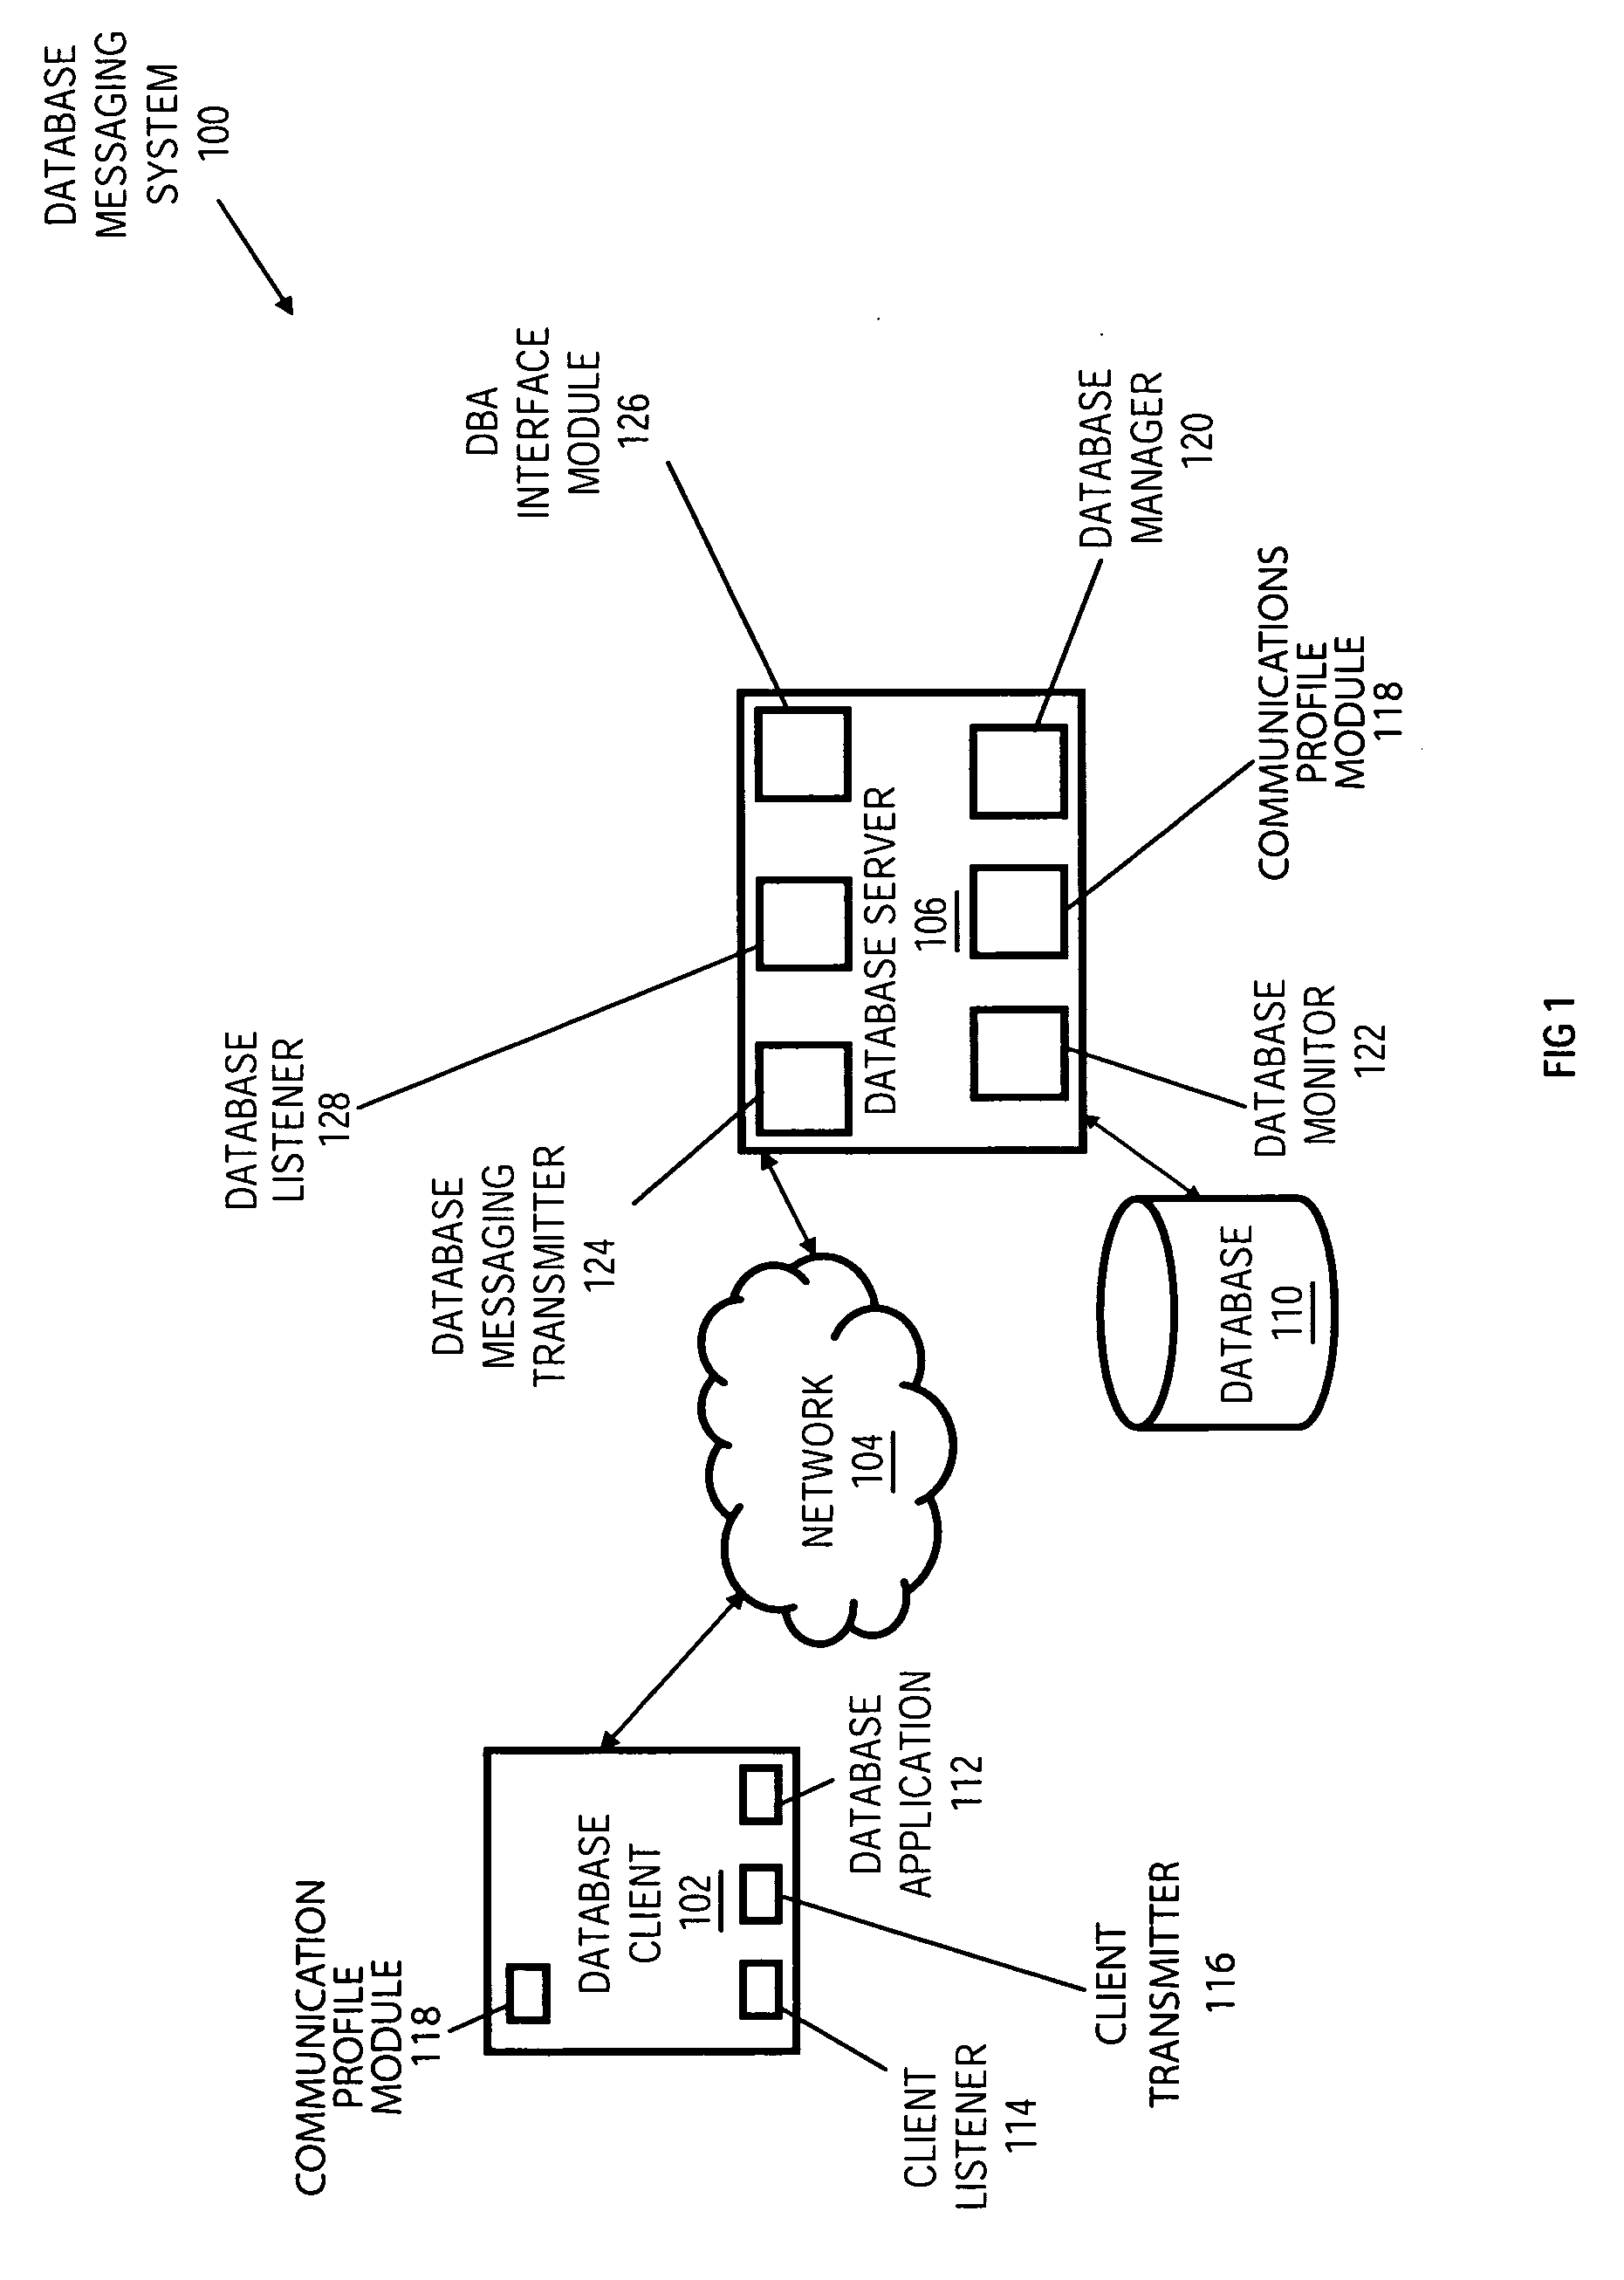 Communication profiles for integrated database messaging system